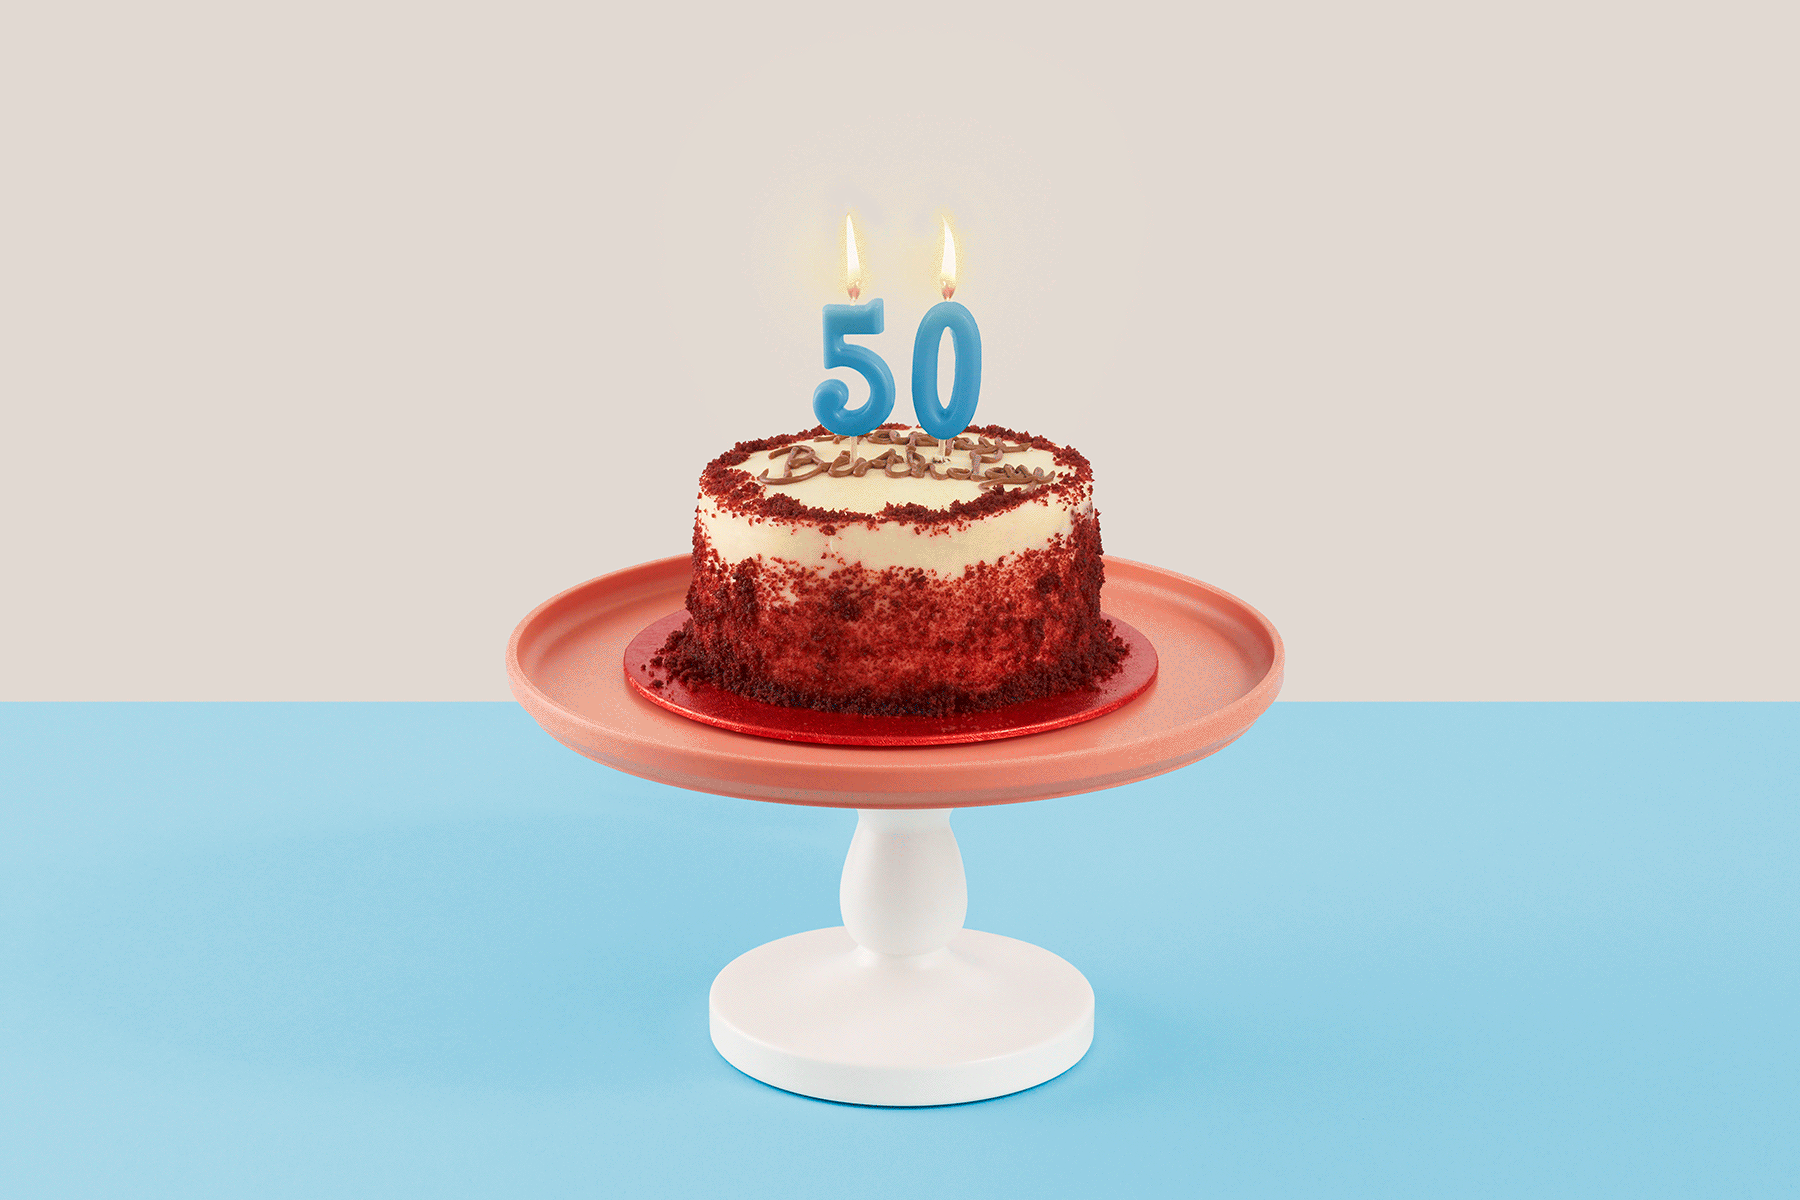 An image of a birthday cake with two candles in the shape of a 50